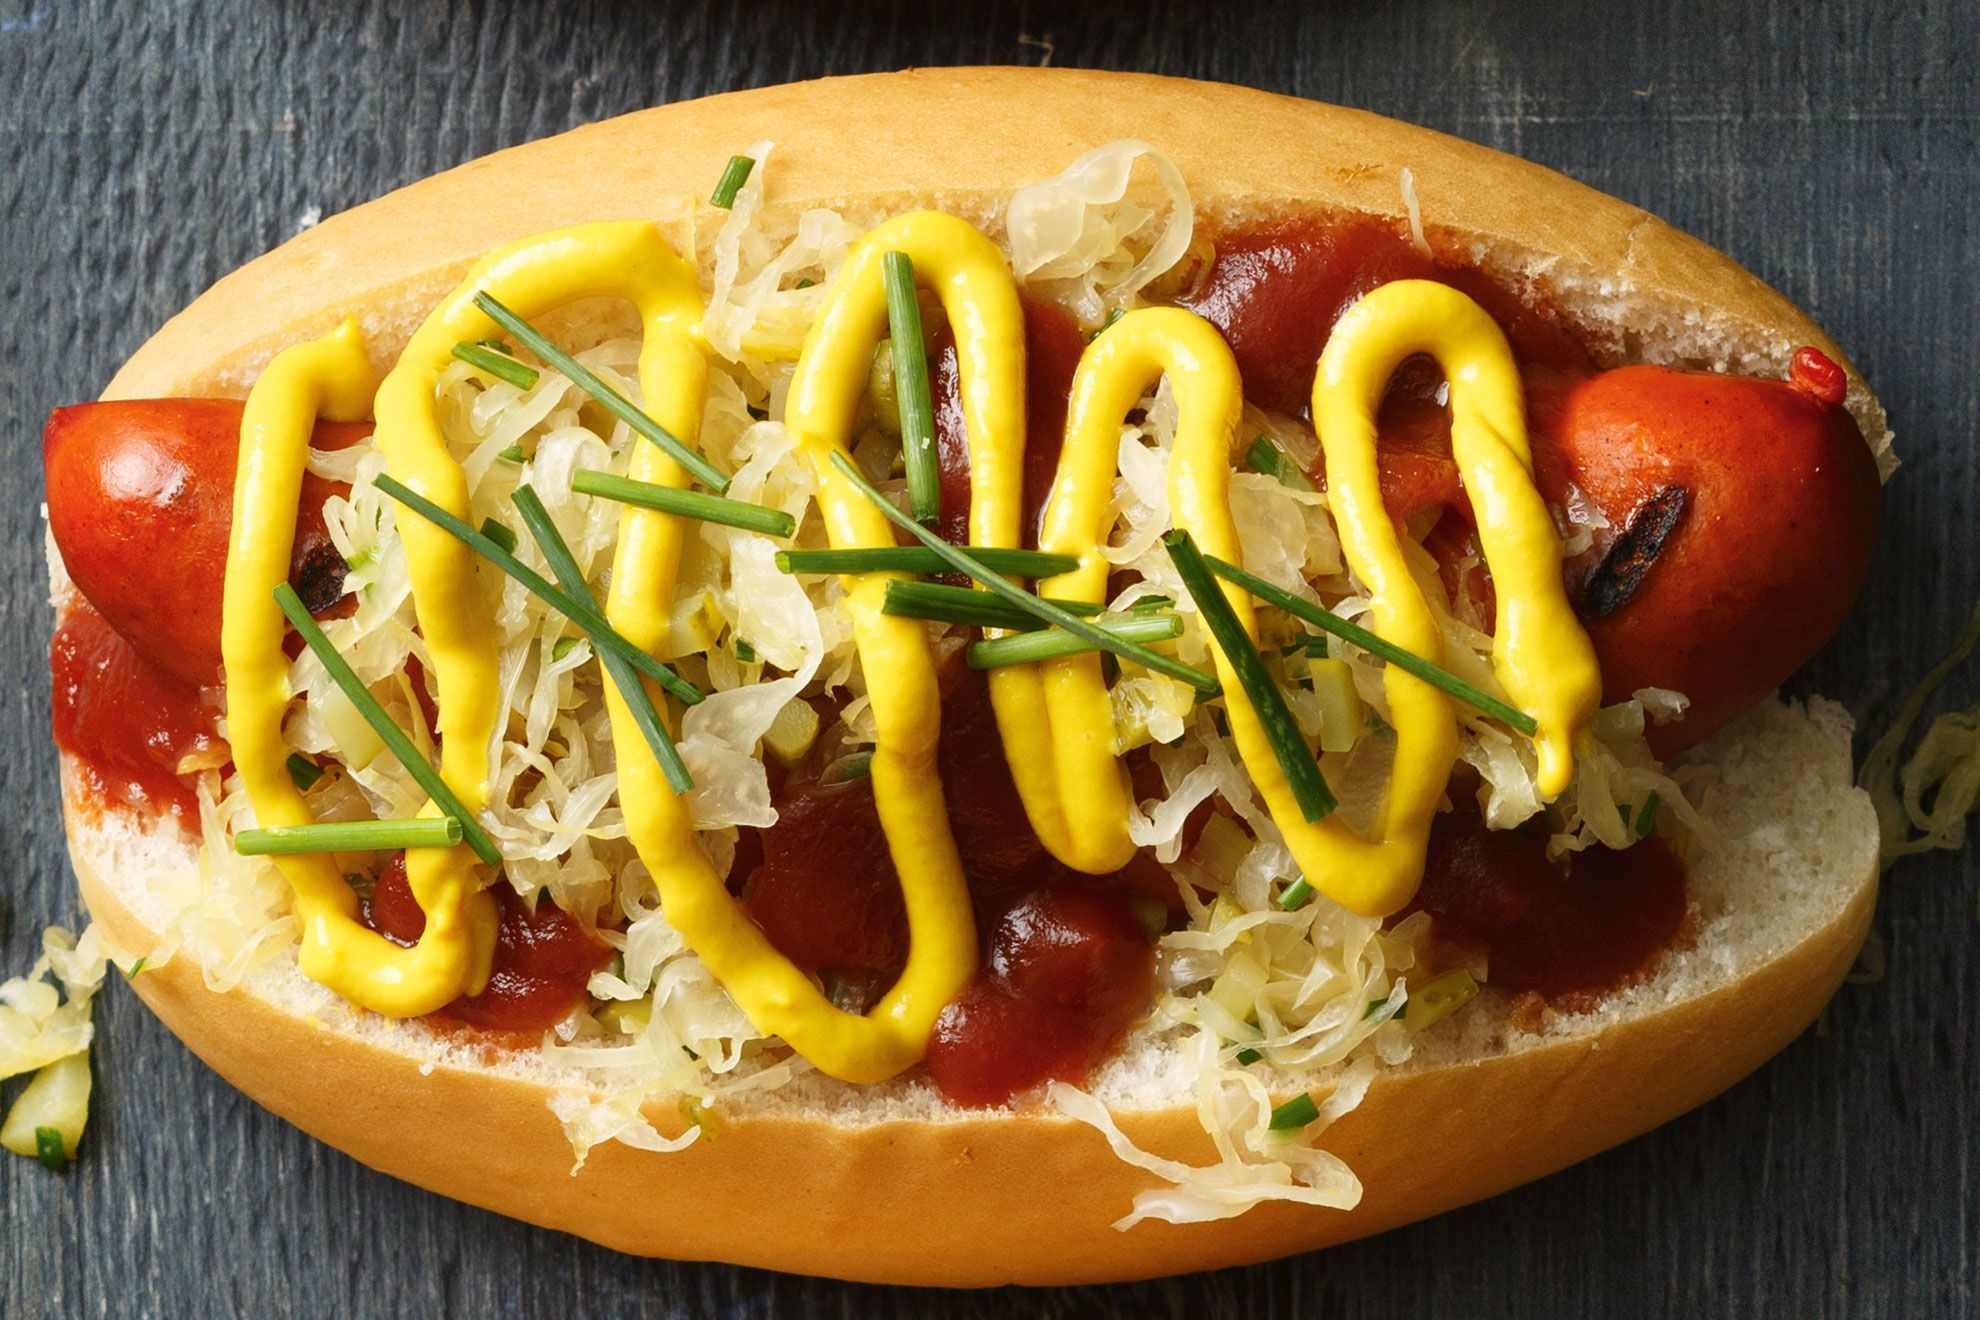 Must try this hot dog with cheese and pickles